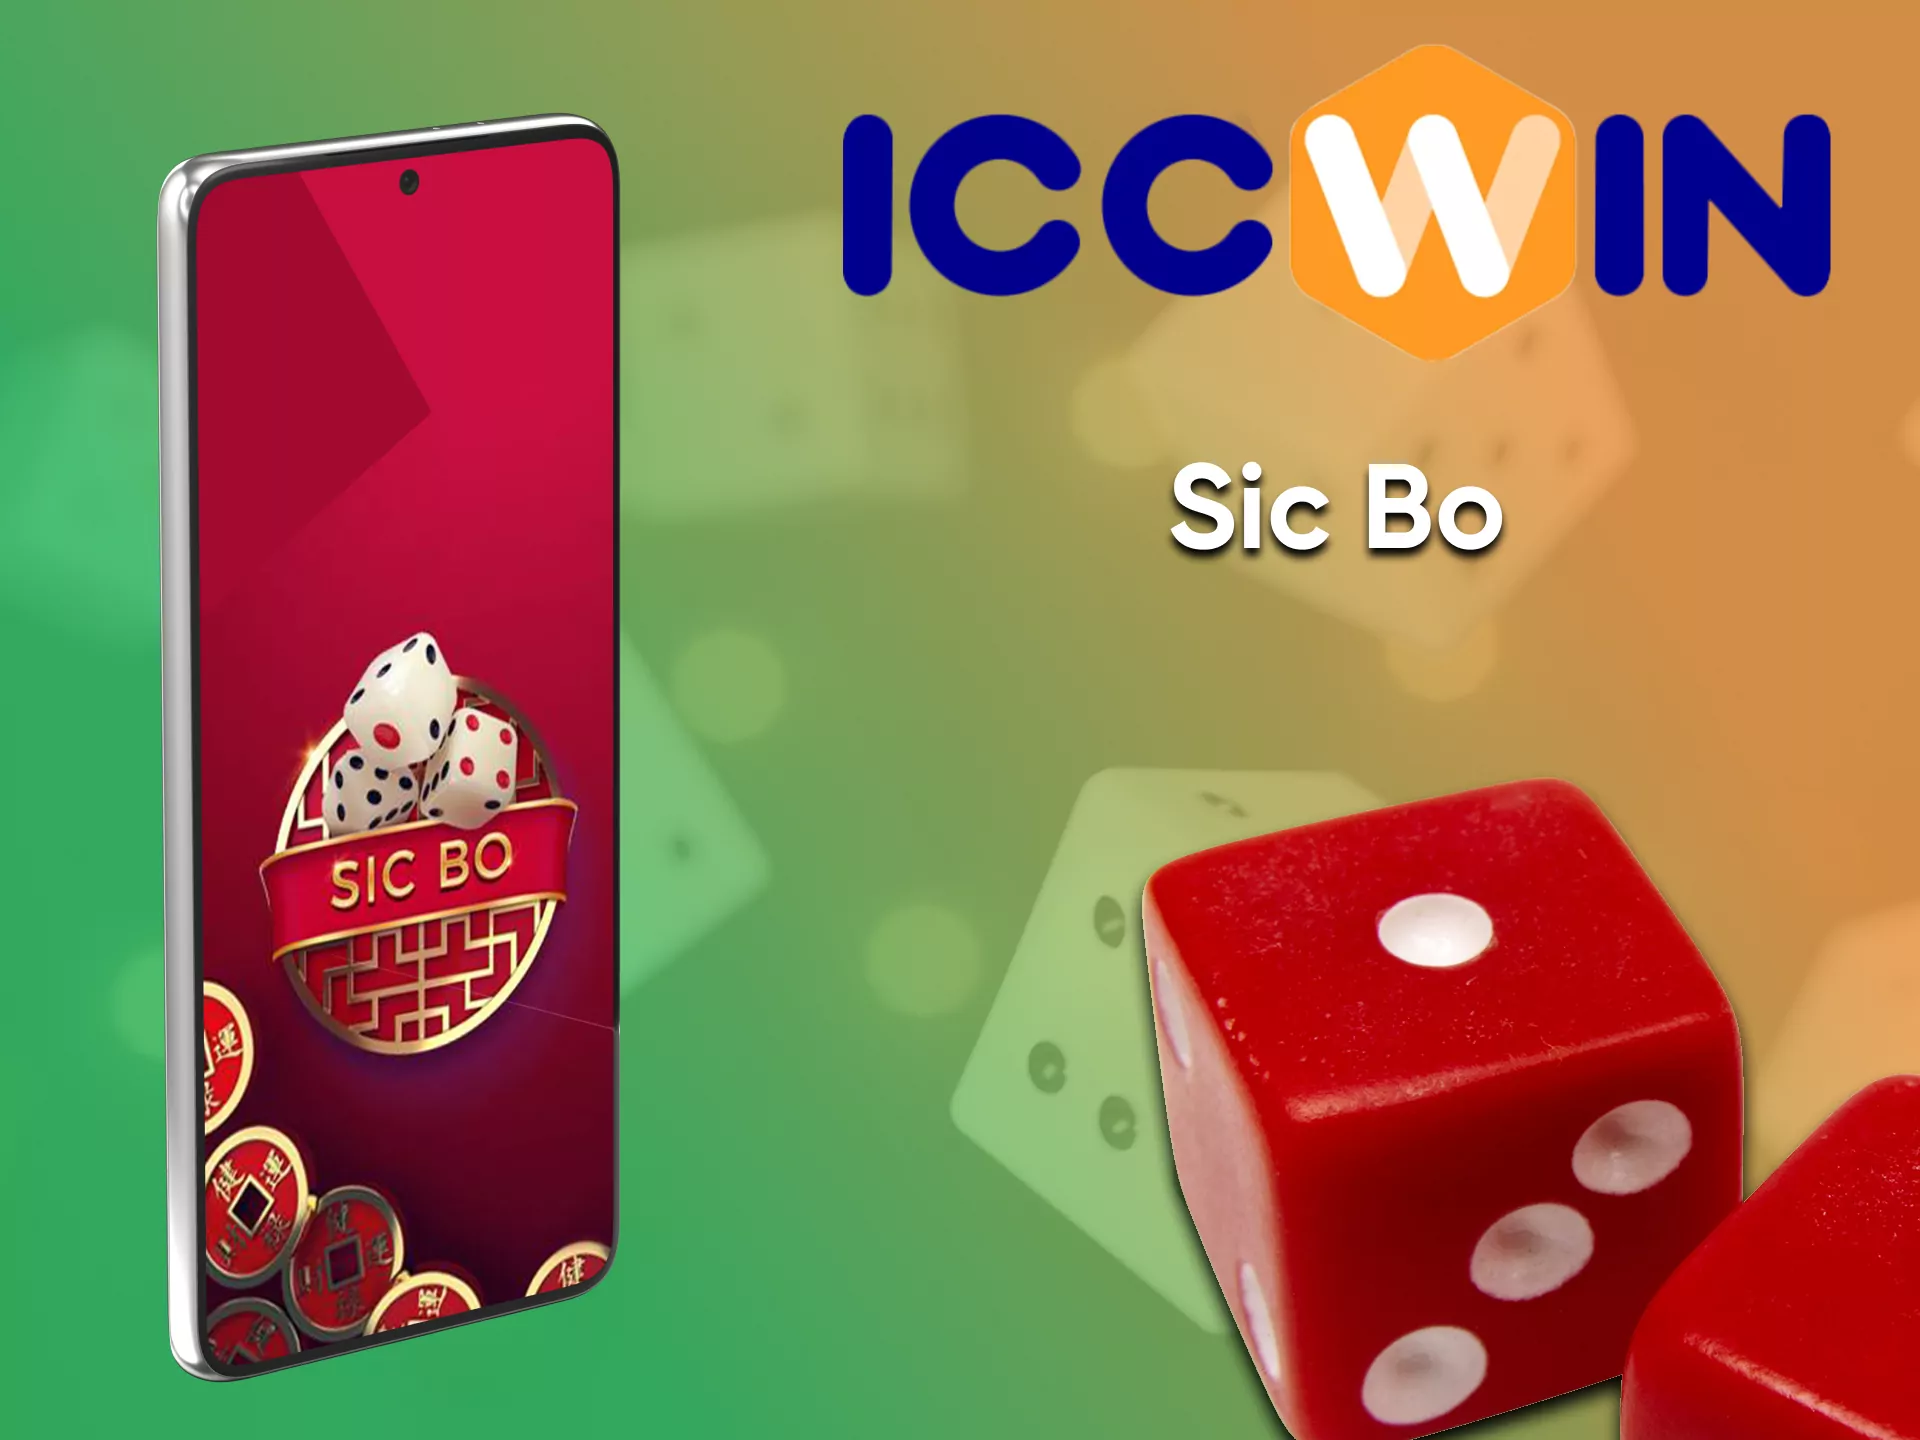 Choose a section with Sic bo from ICCWin.